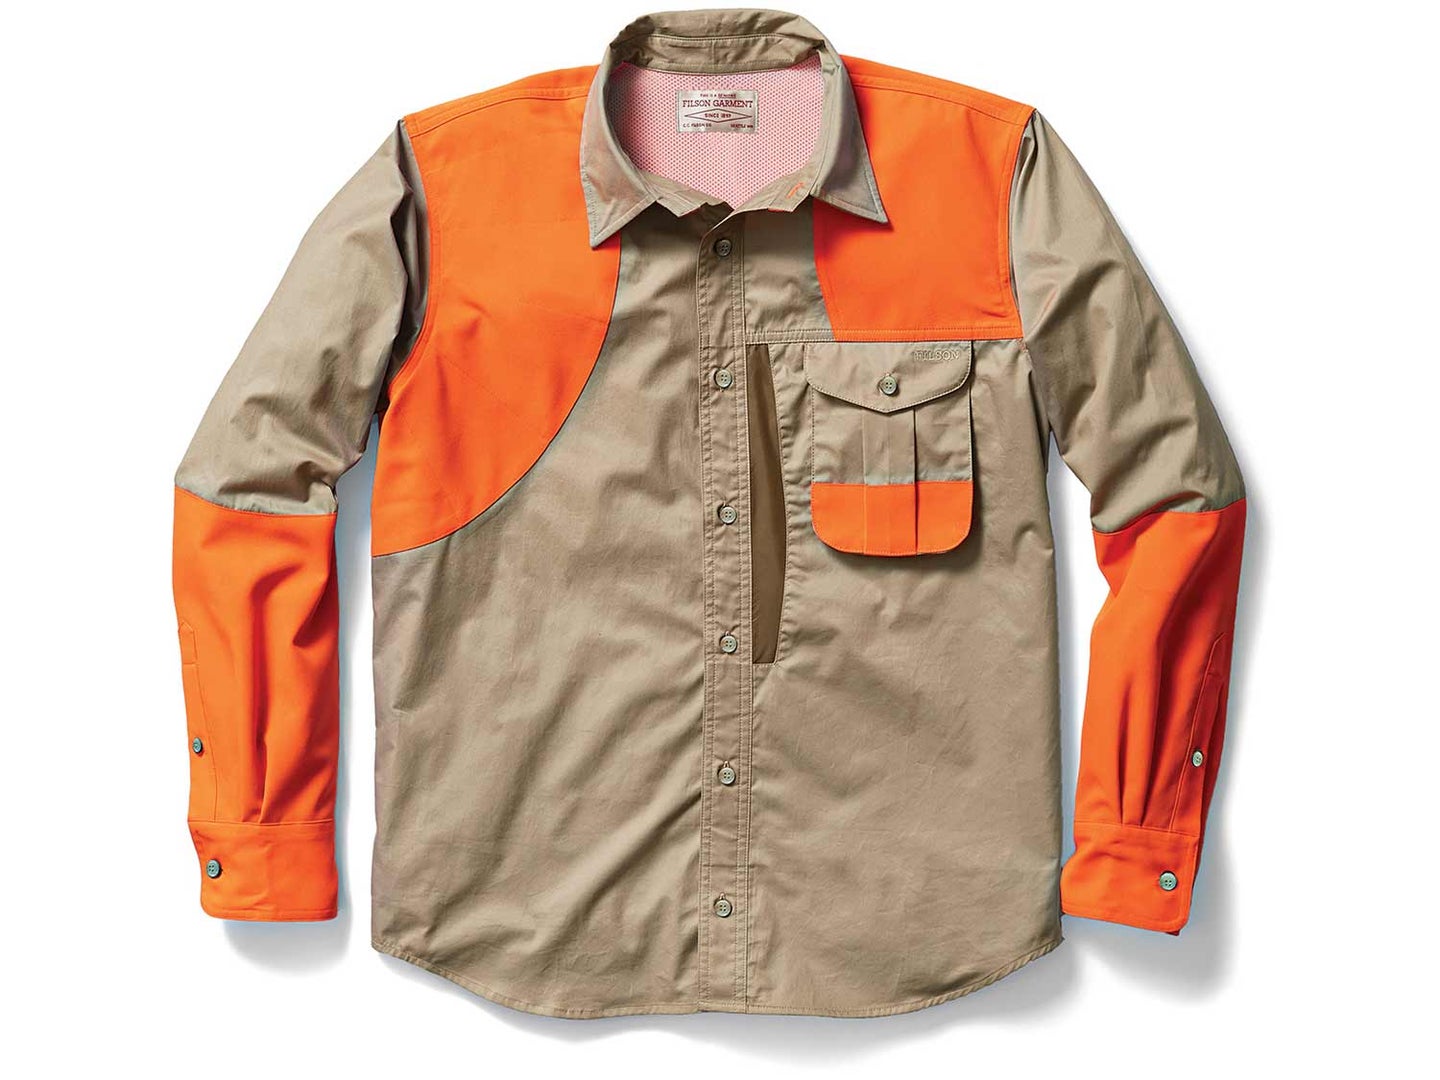 Filson’s Frontloading Right-Handed Shooting Shirt